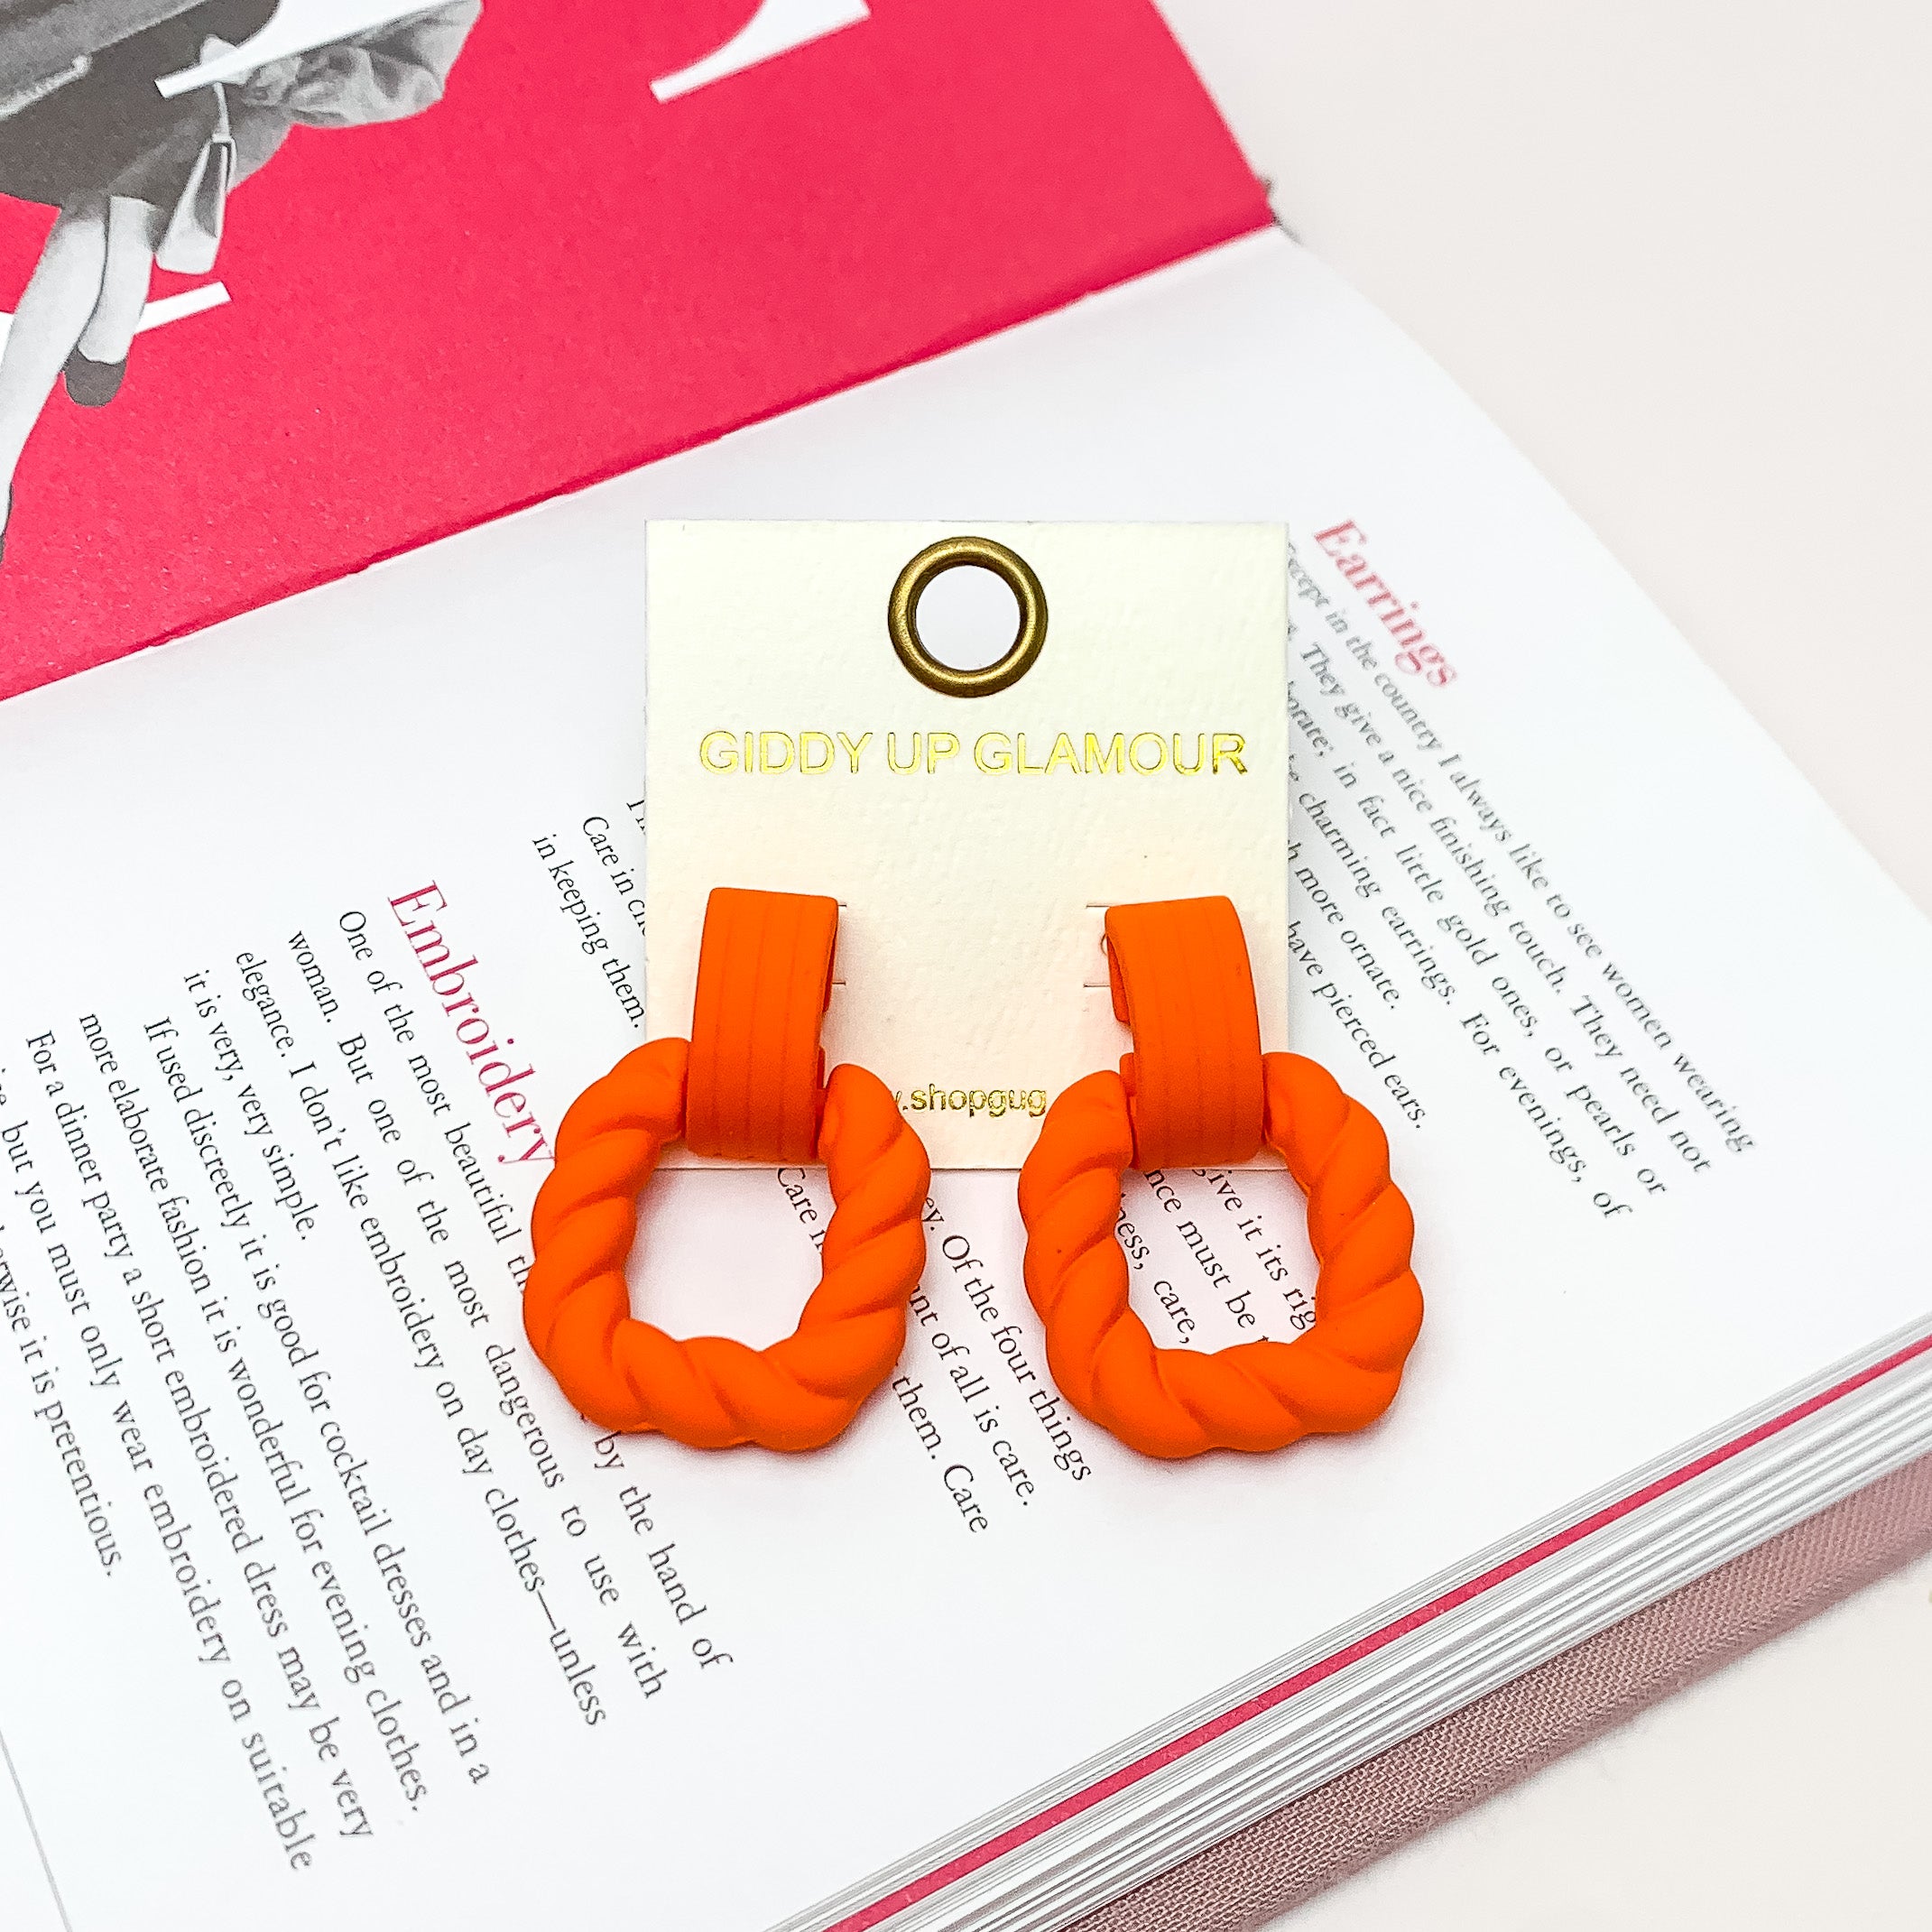 Ready to Party Twisted Square Earrings in Orange. Pictured on an open page of a book.